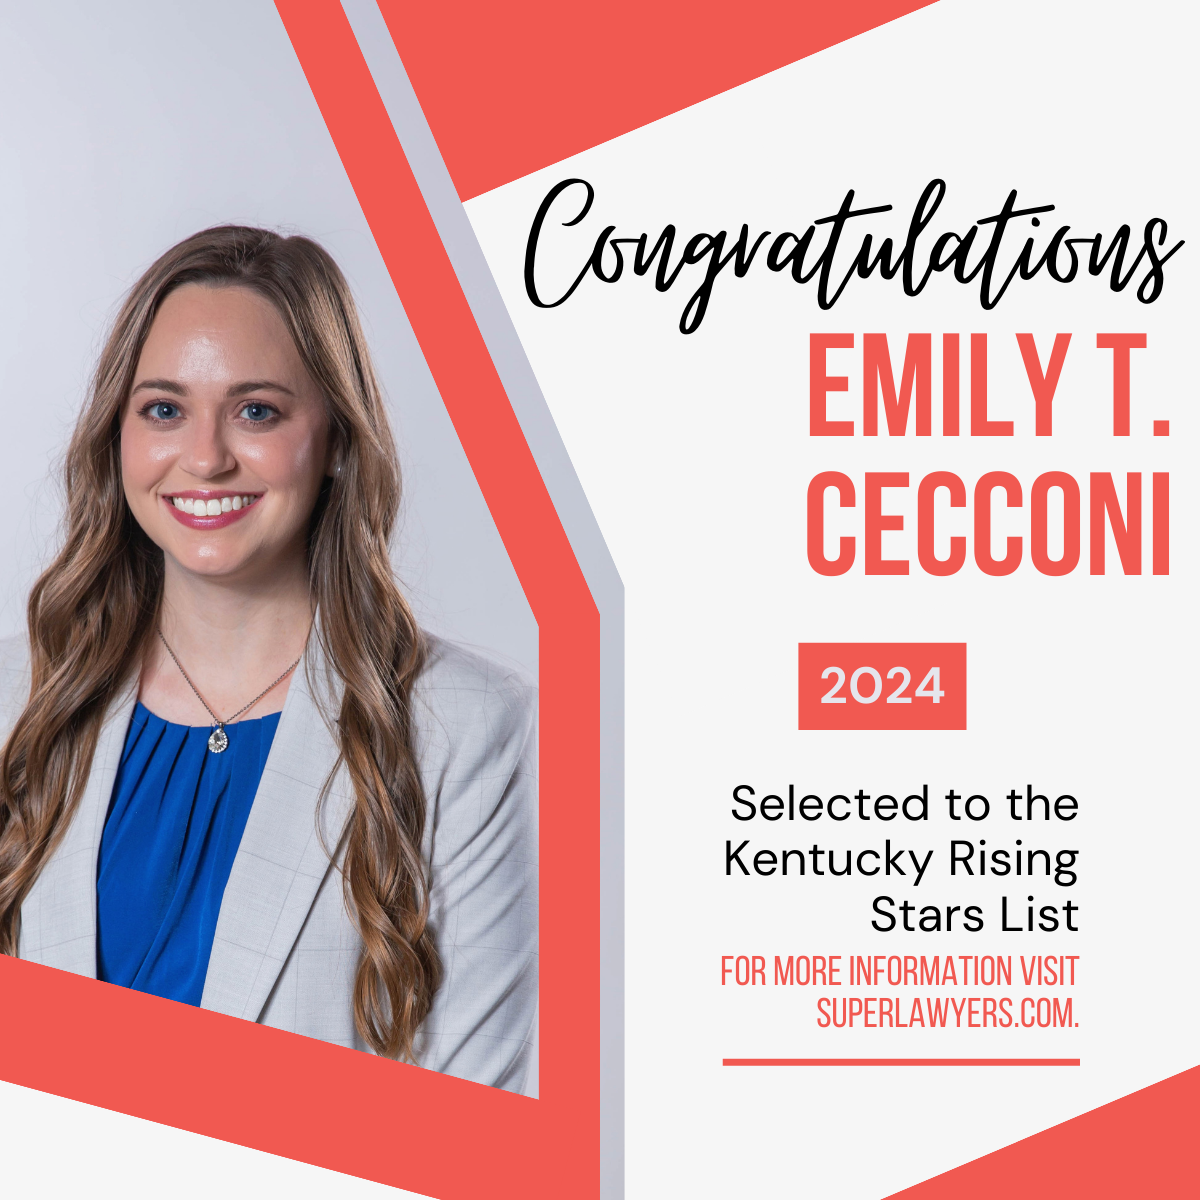 Emily T. Cecconi Selected to 2024 Rising Stars List